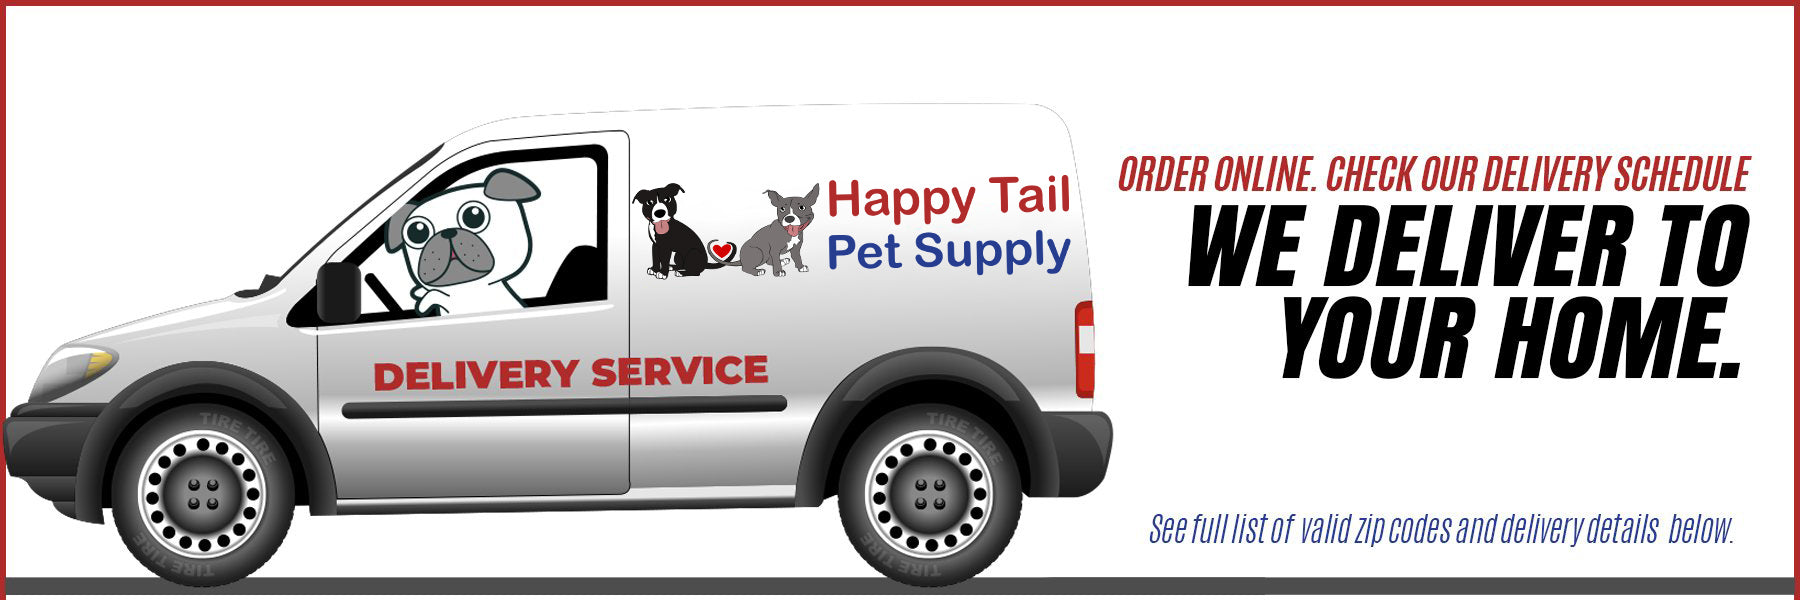 image of delivery truck with happy tail logo